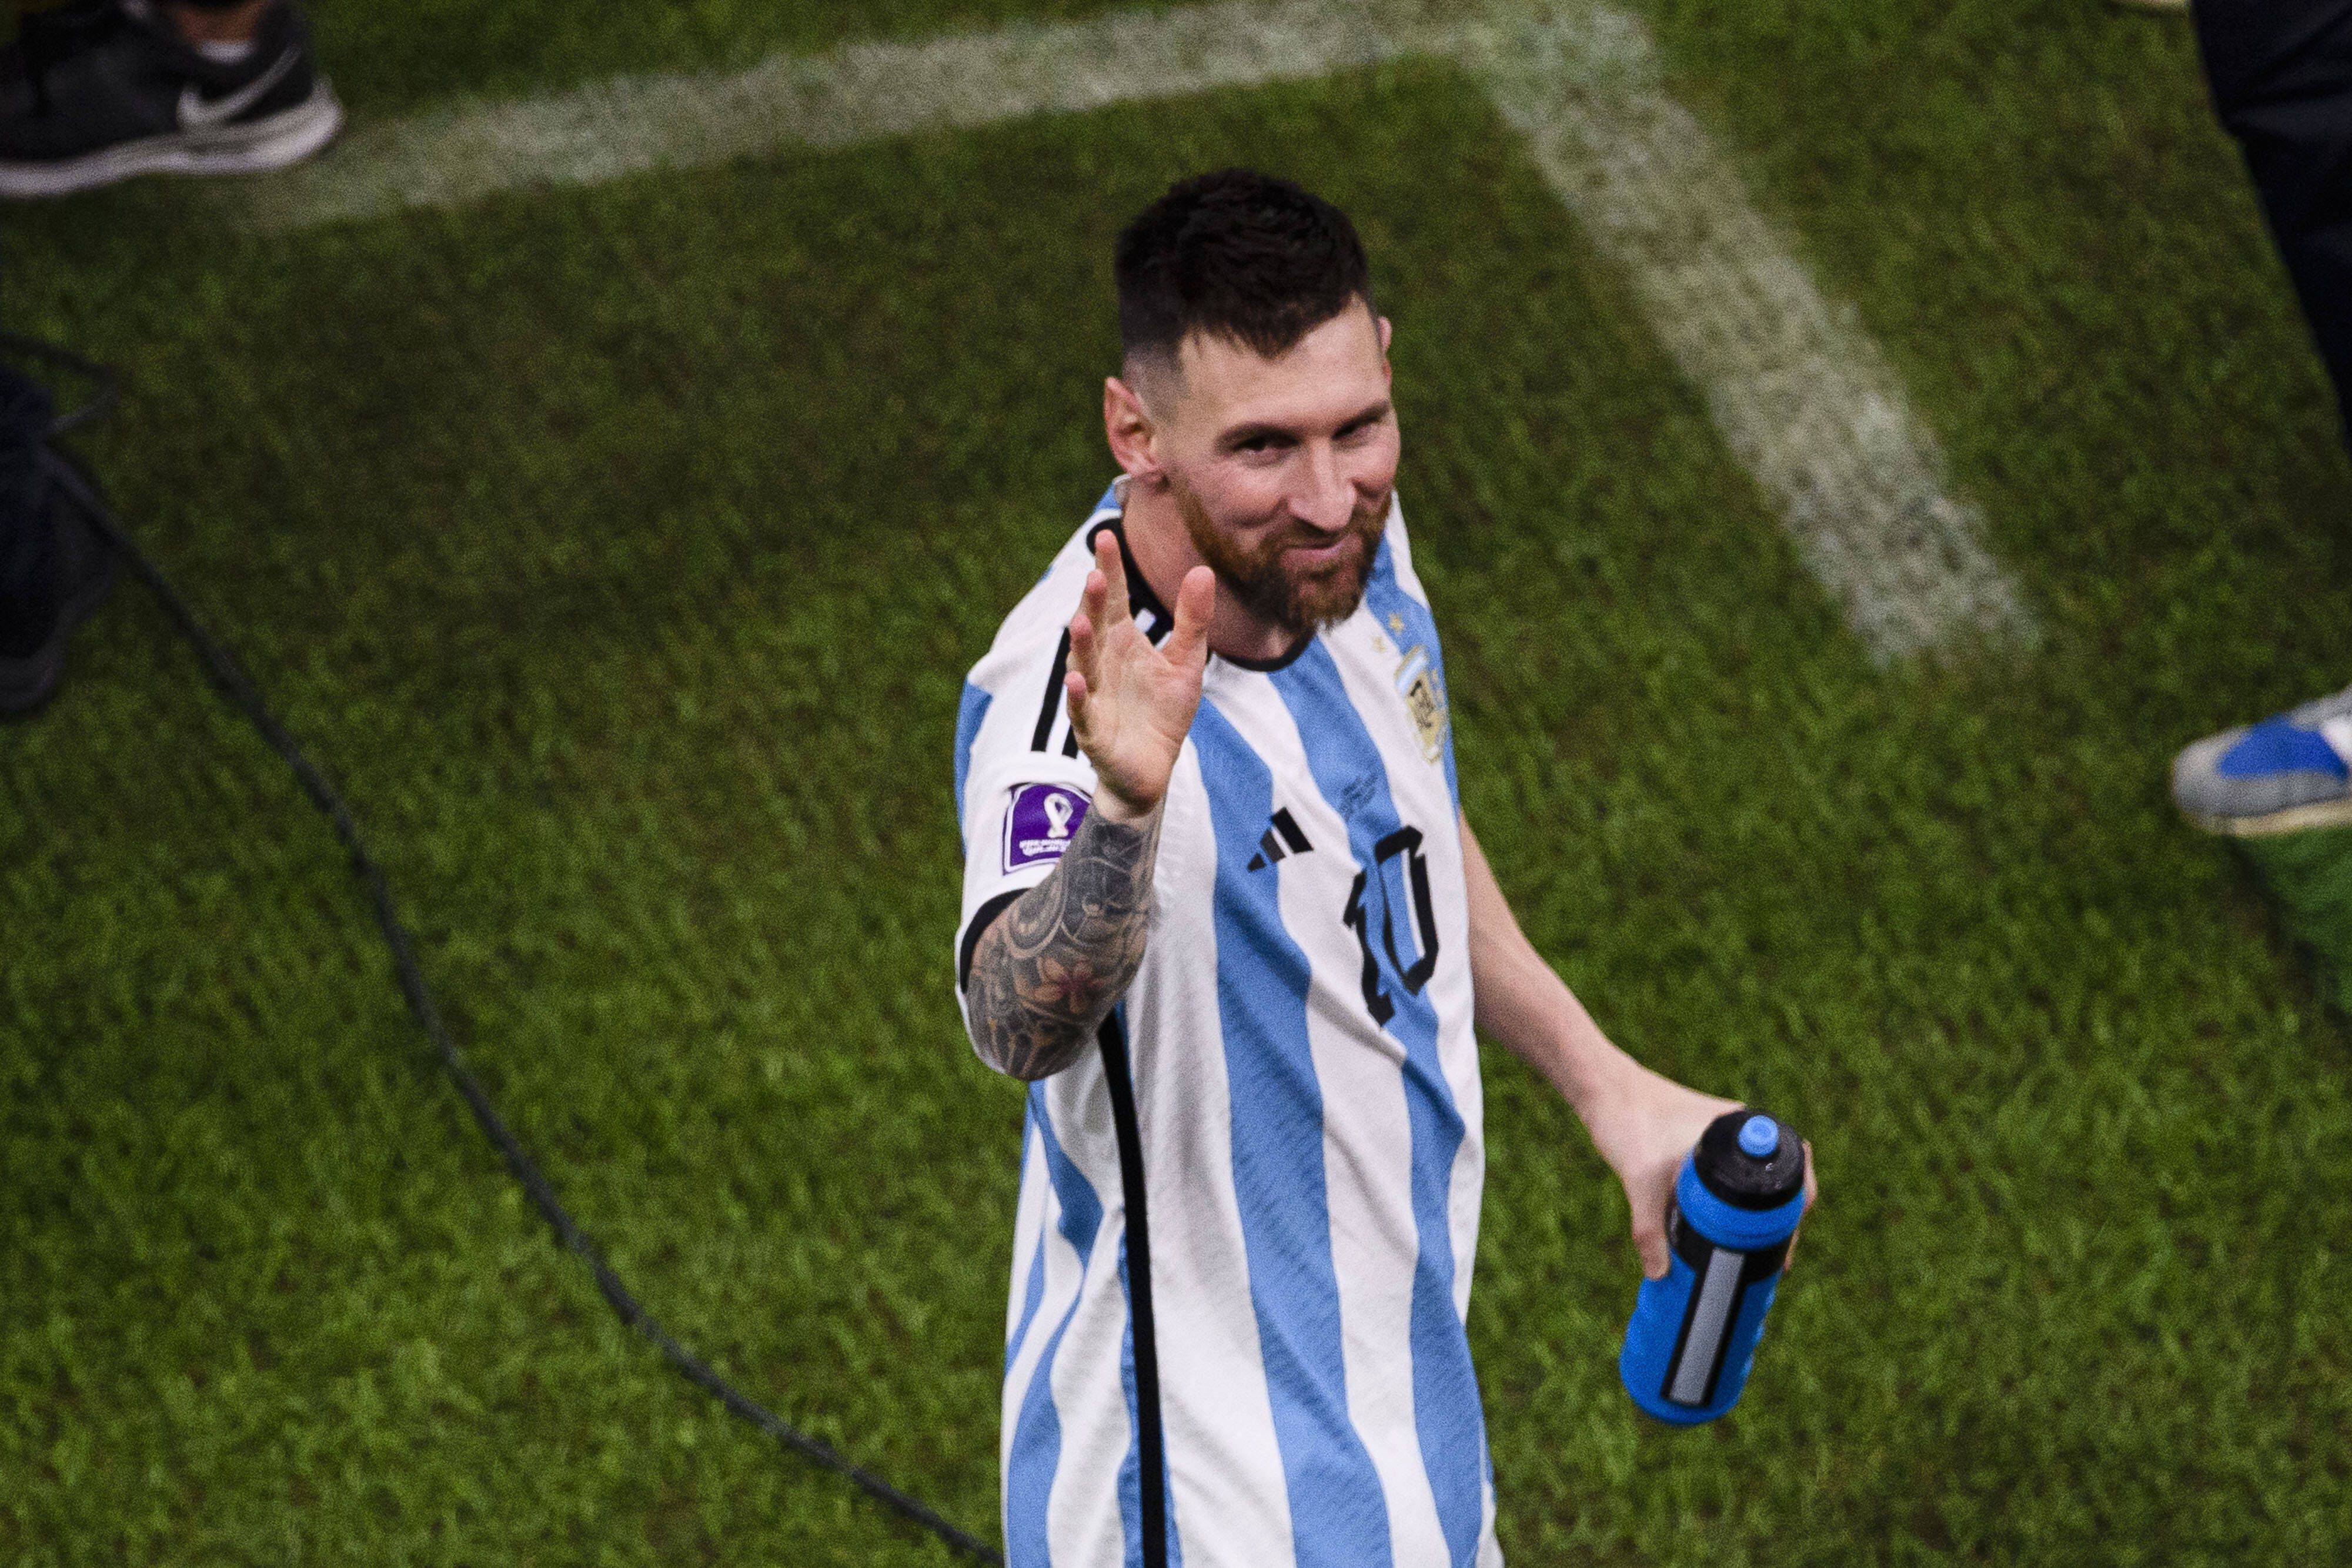 Lionel Messi is looking to end his career on a high with a World title.